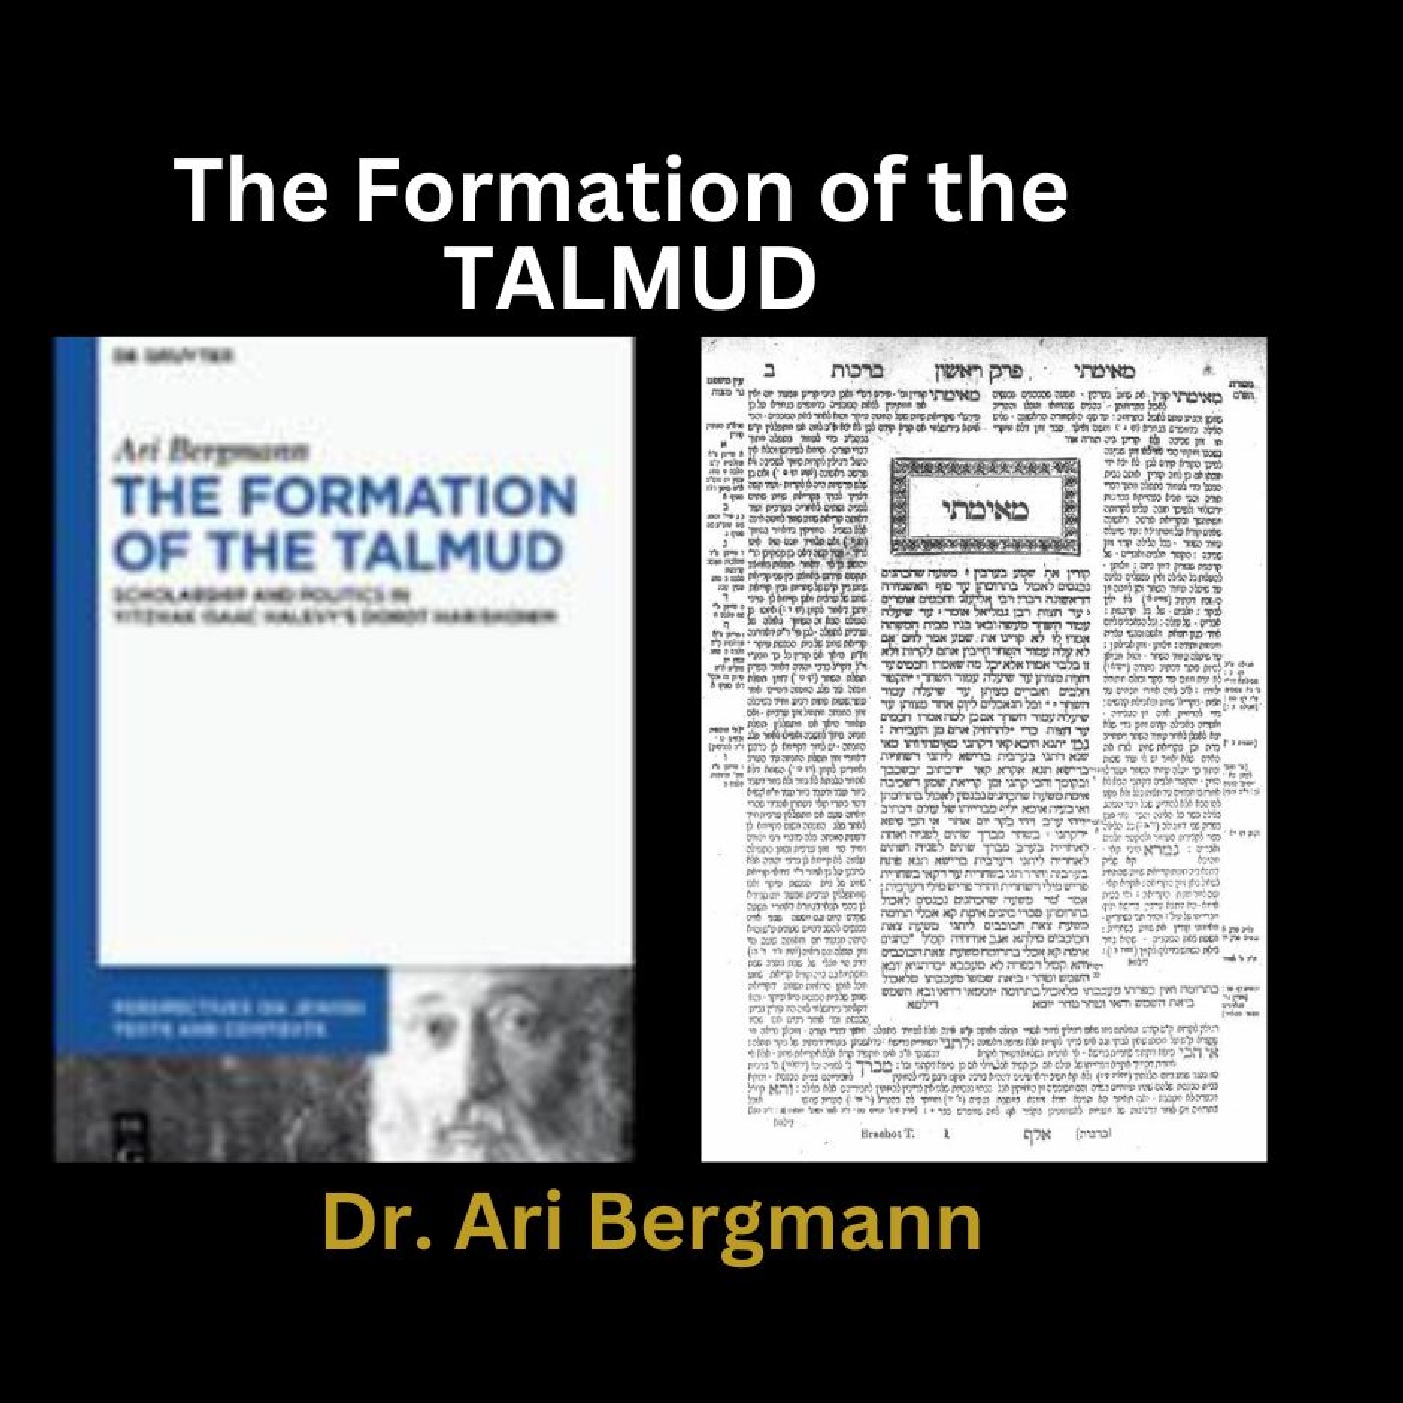 The Formation of the Talmud - Dr. Ari Bergmann